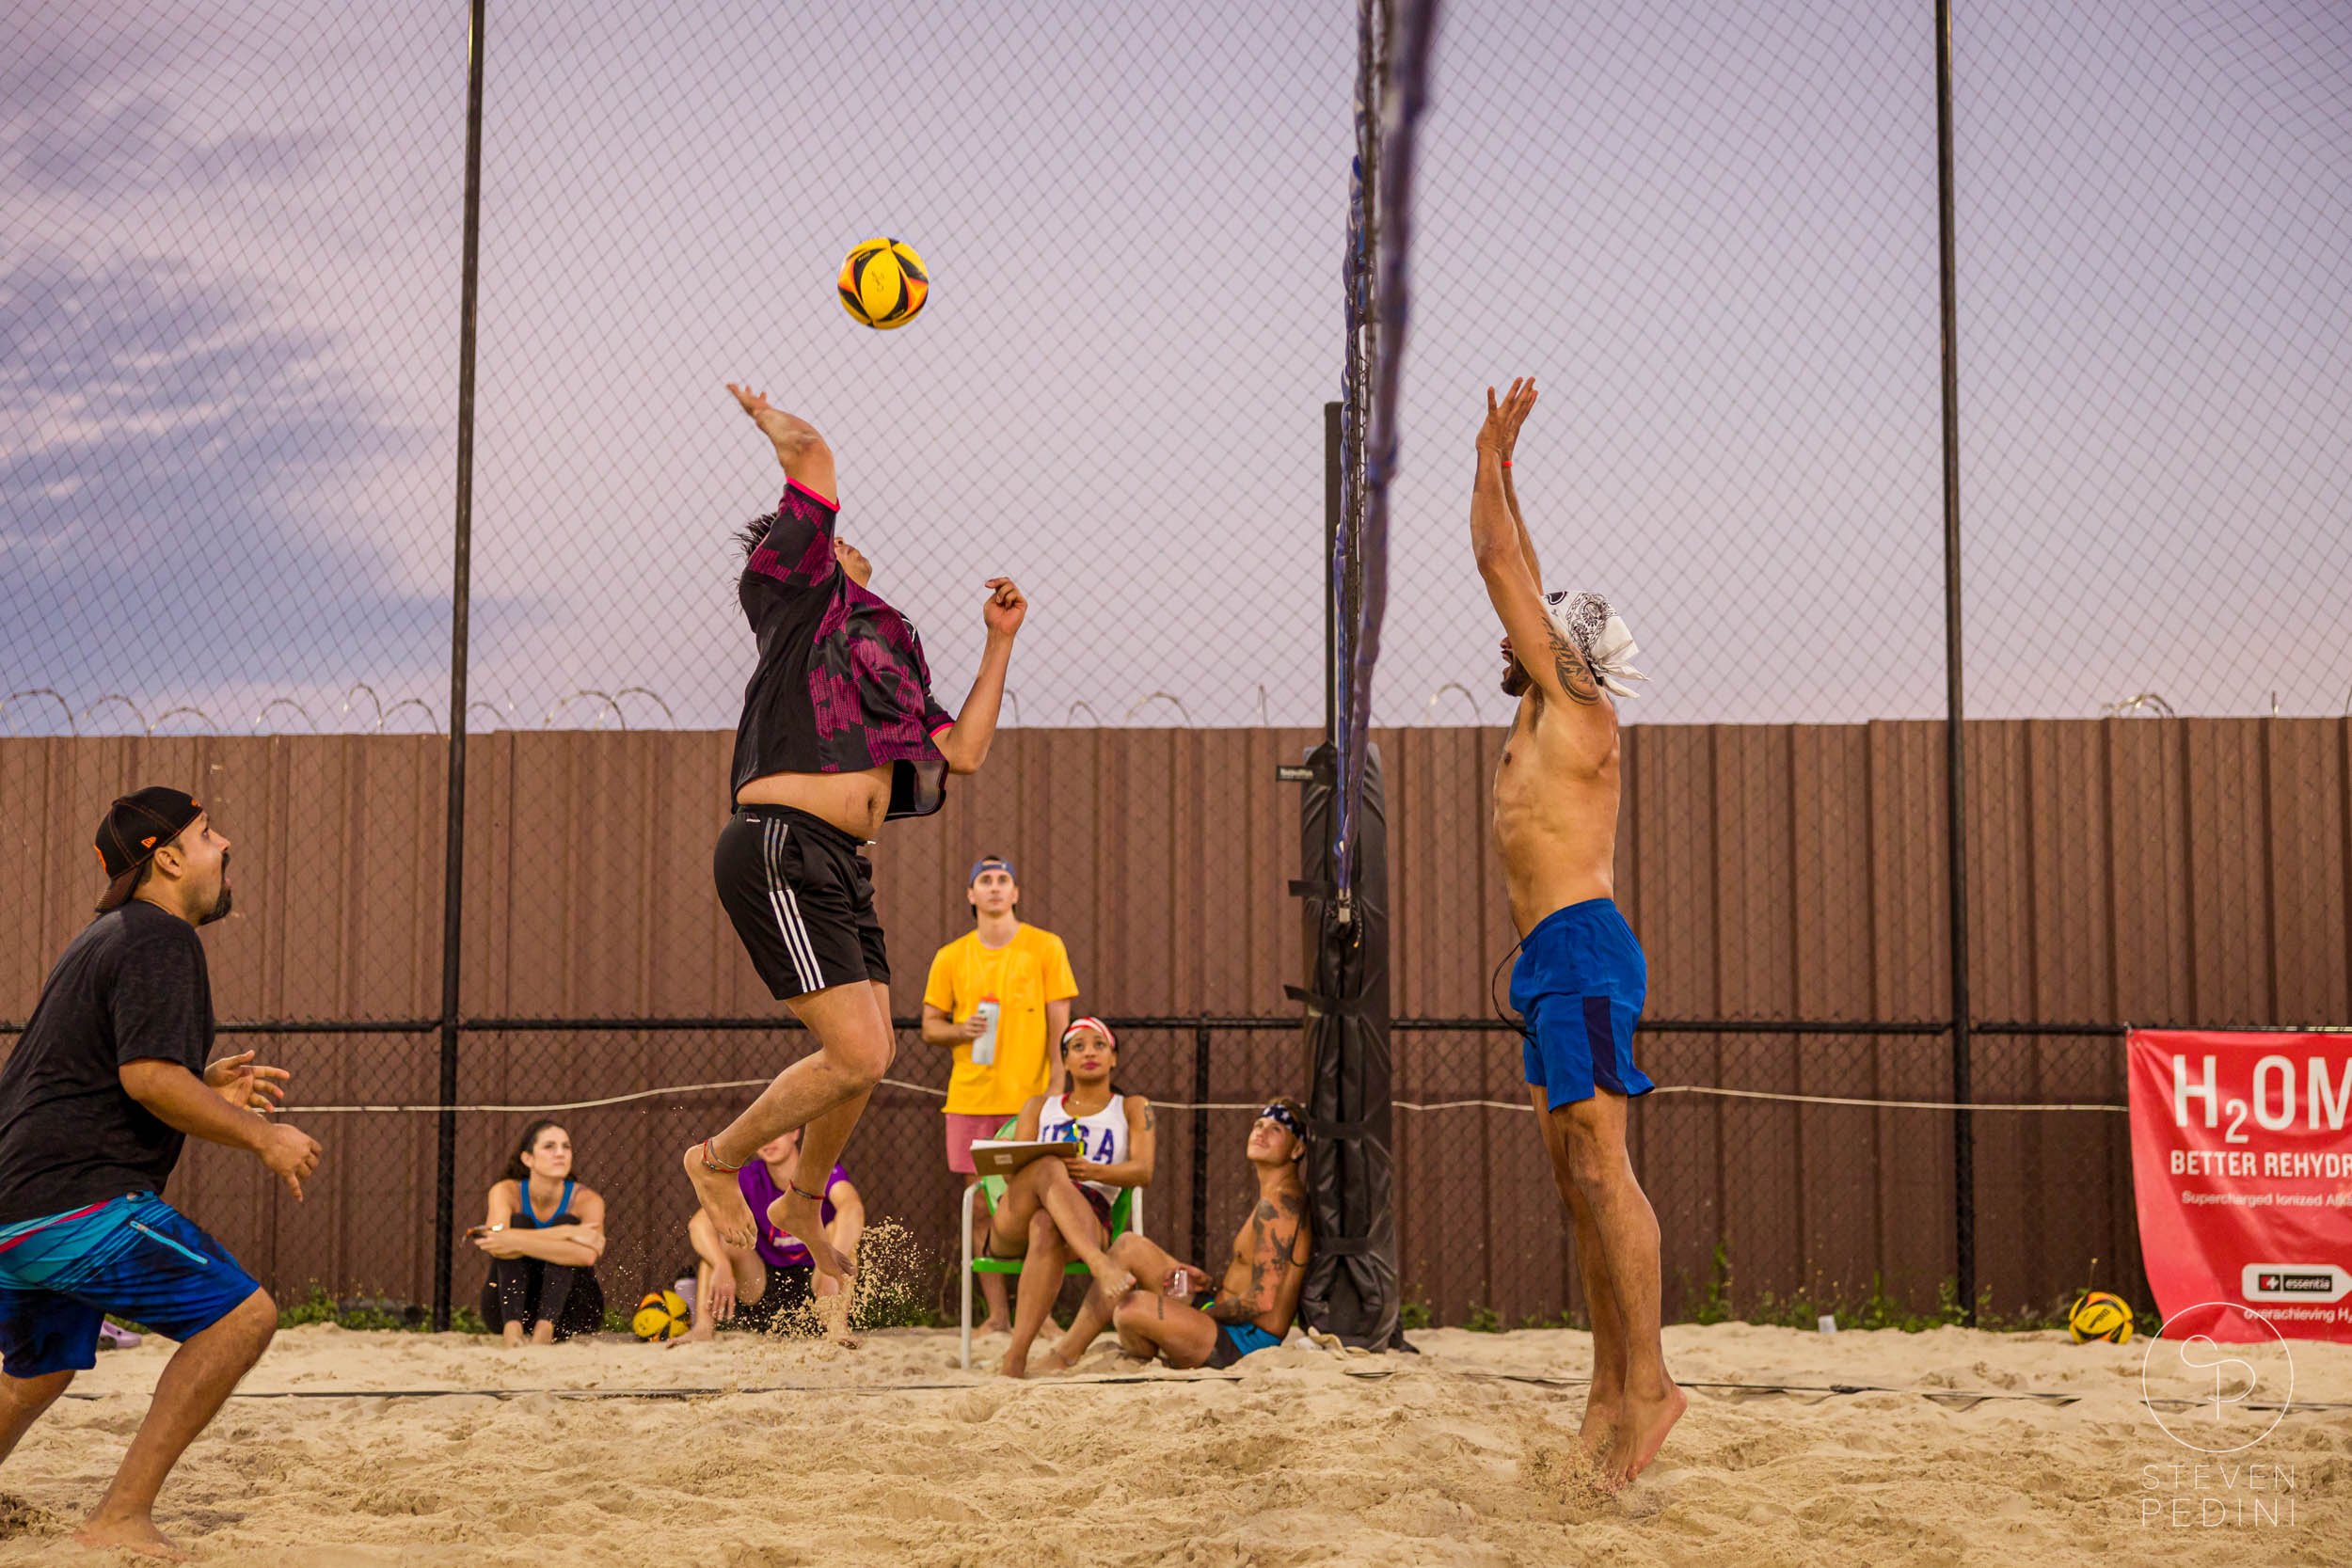 Steven Pedini Photography - Bumpy Pickle - Sand Volleyball - Houston TX - World Cup of Volleyball - 00276.jpg